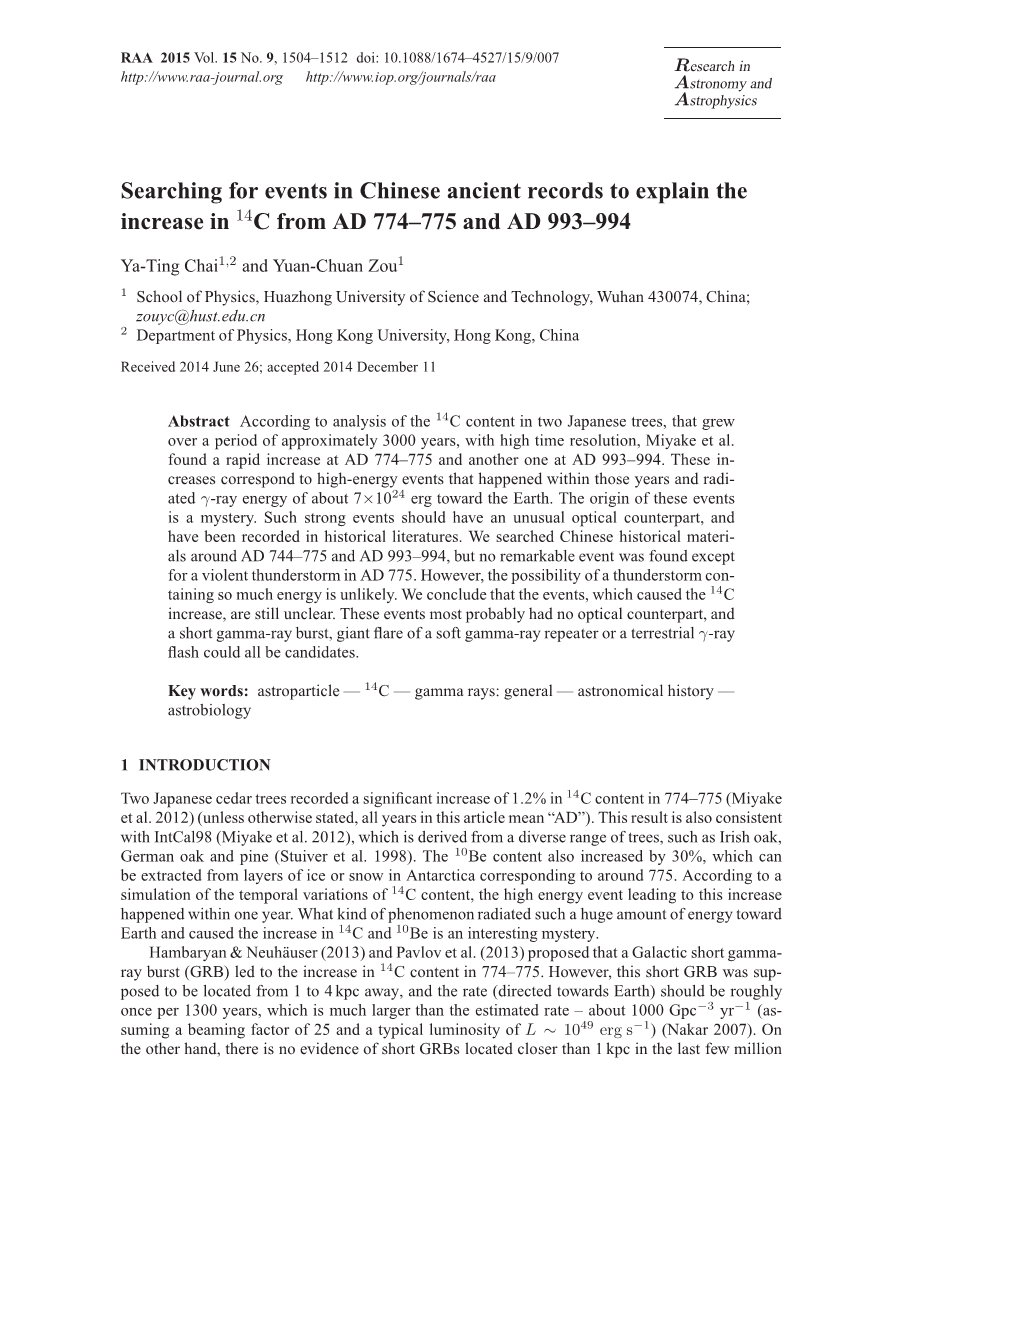 Searching for Events in Chinese Ancient Records to Explain the Increase in C from AD 774–775 and AD 993–994